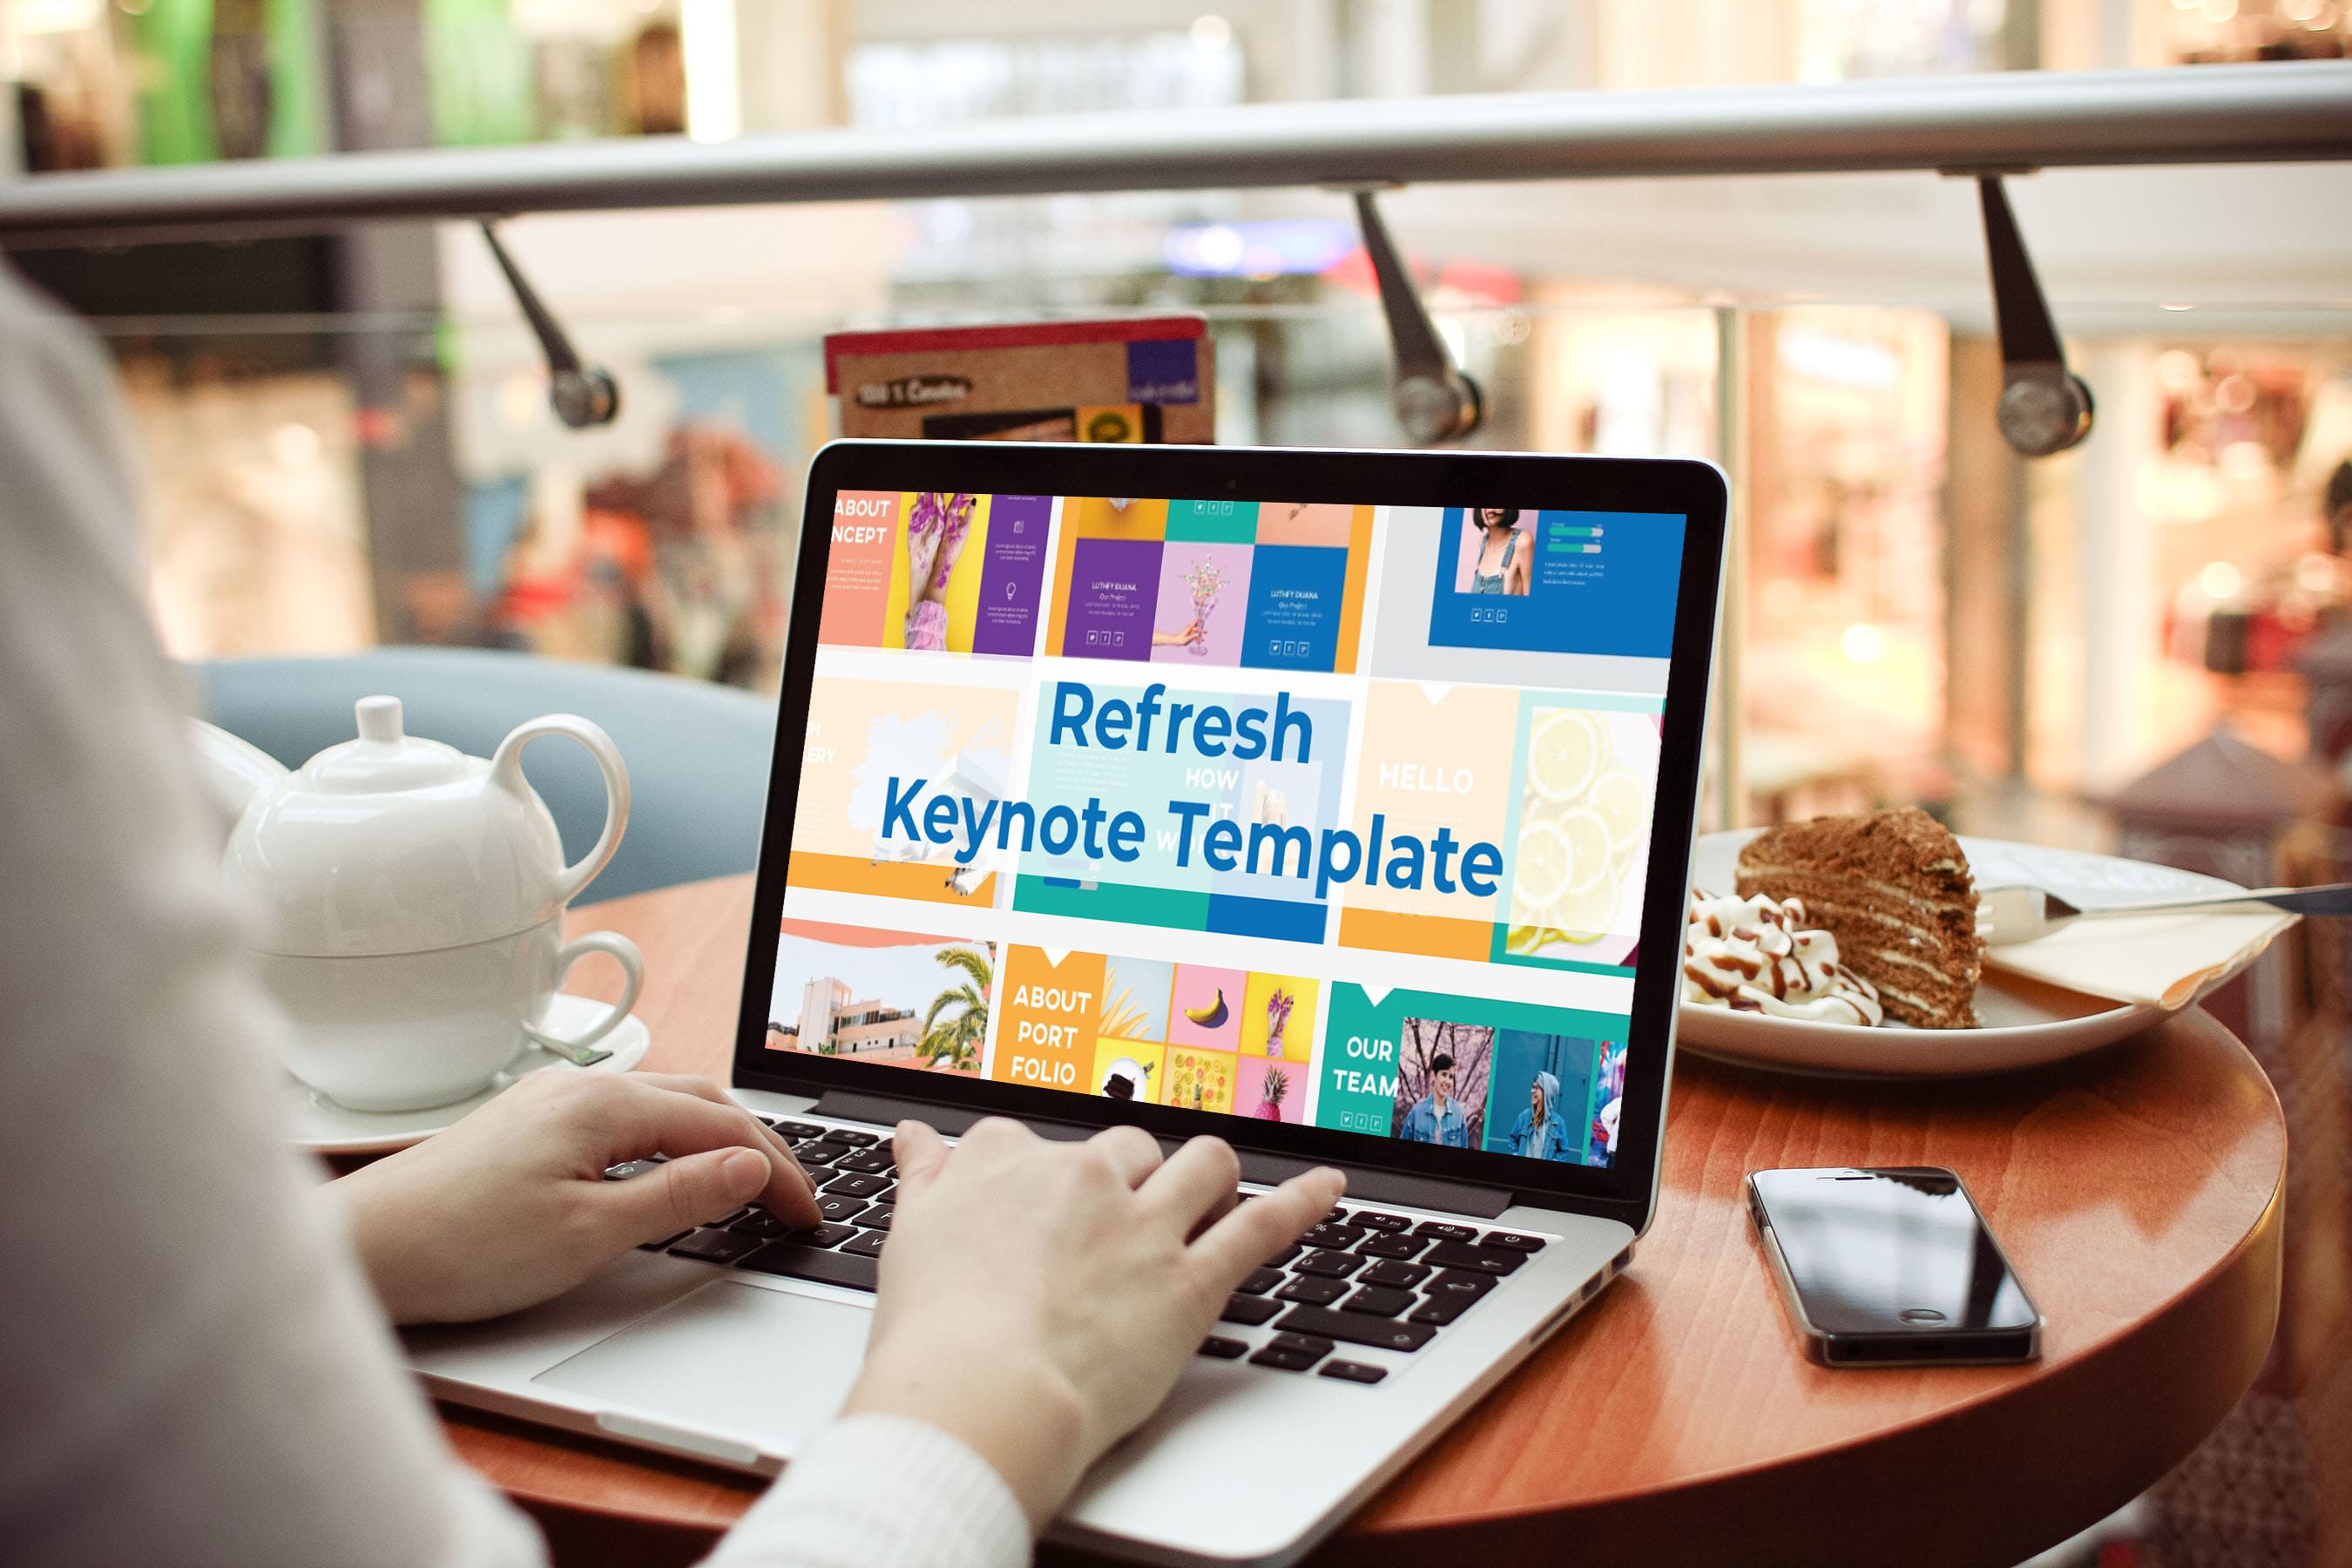 Laptop option of the Refresh Keynote Template.